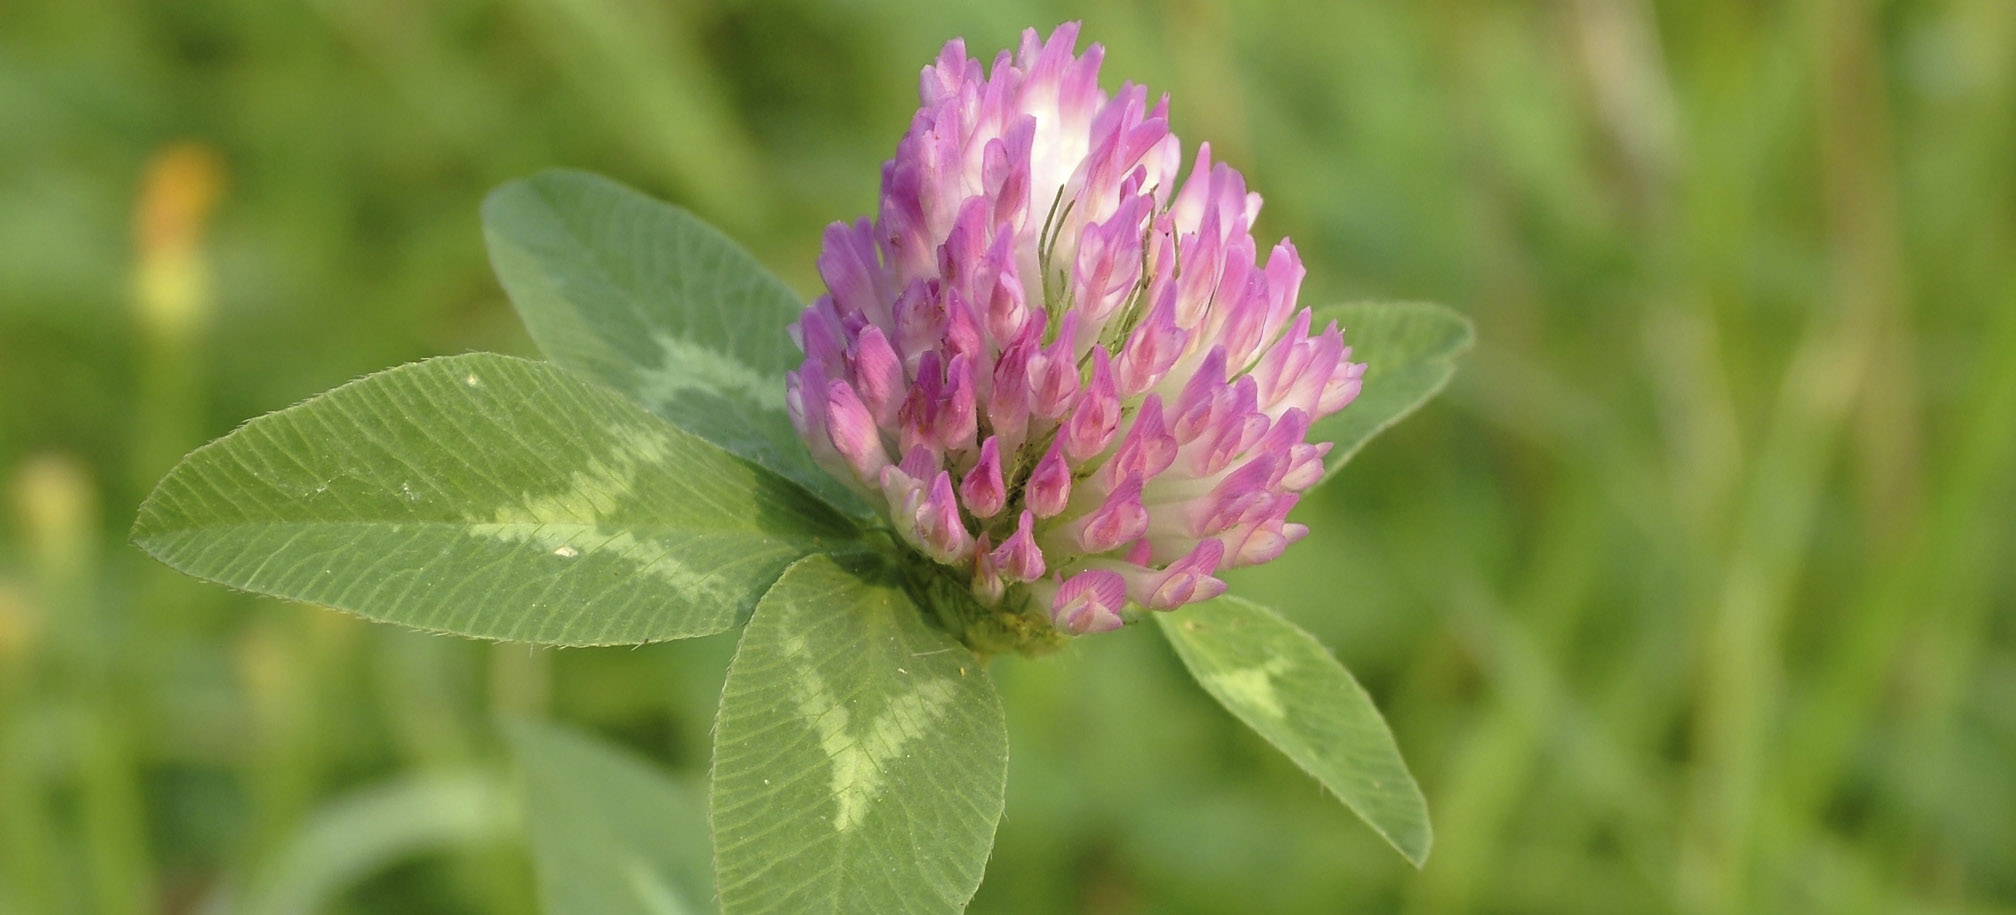 A single red clover flower with green leaves